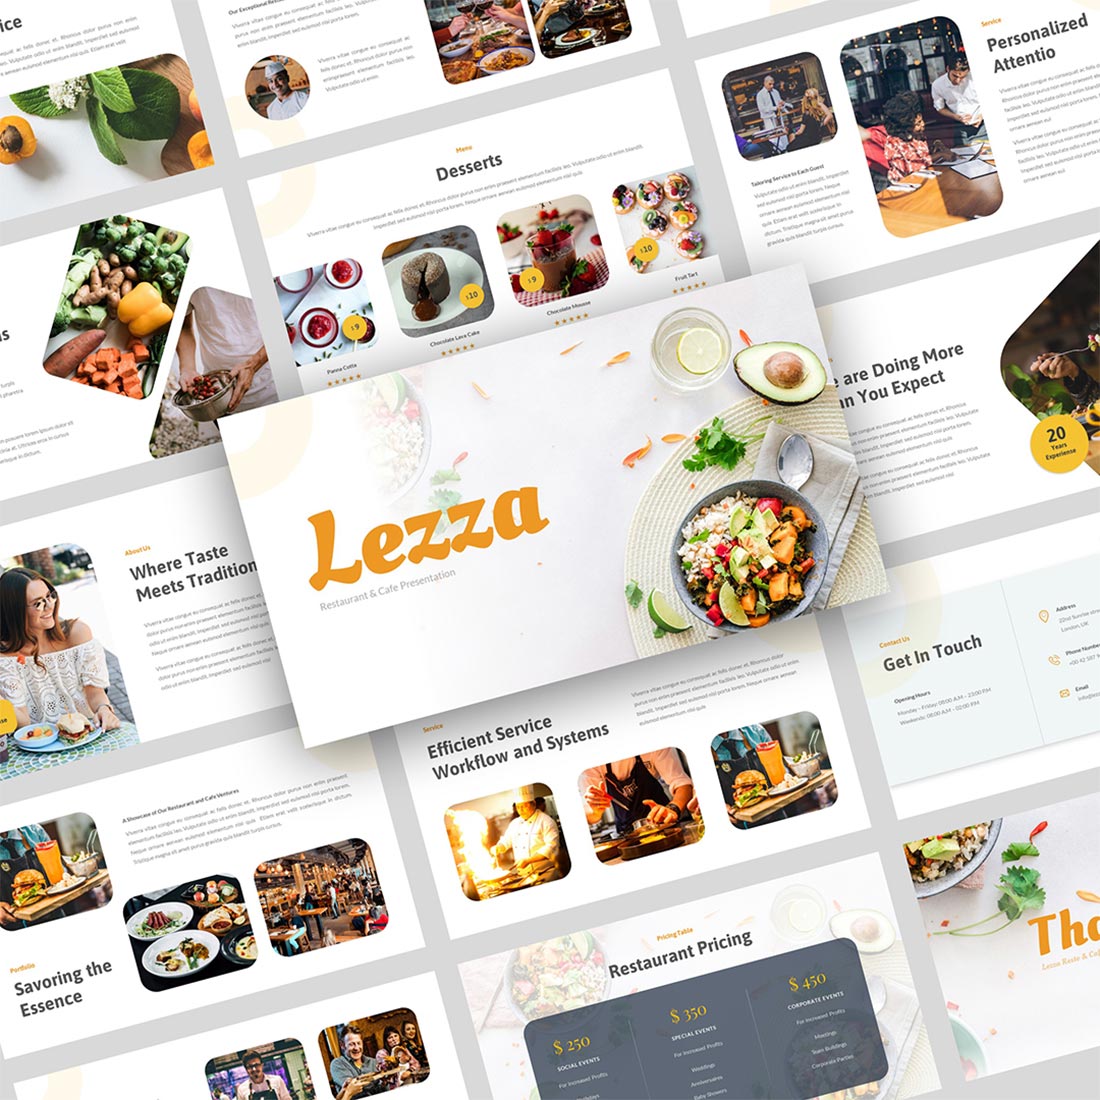 Lezza - Restaurant & Cafe Keynote Template cover image.